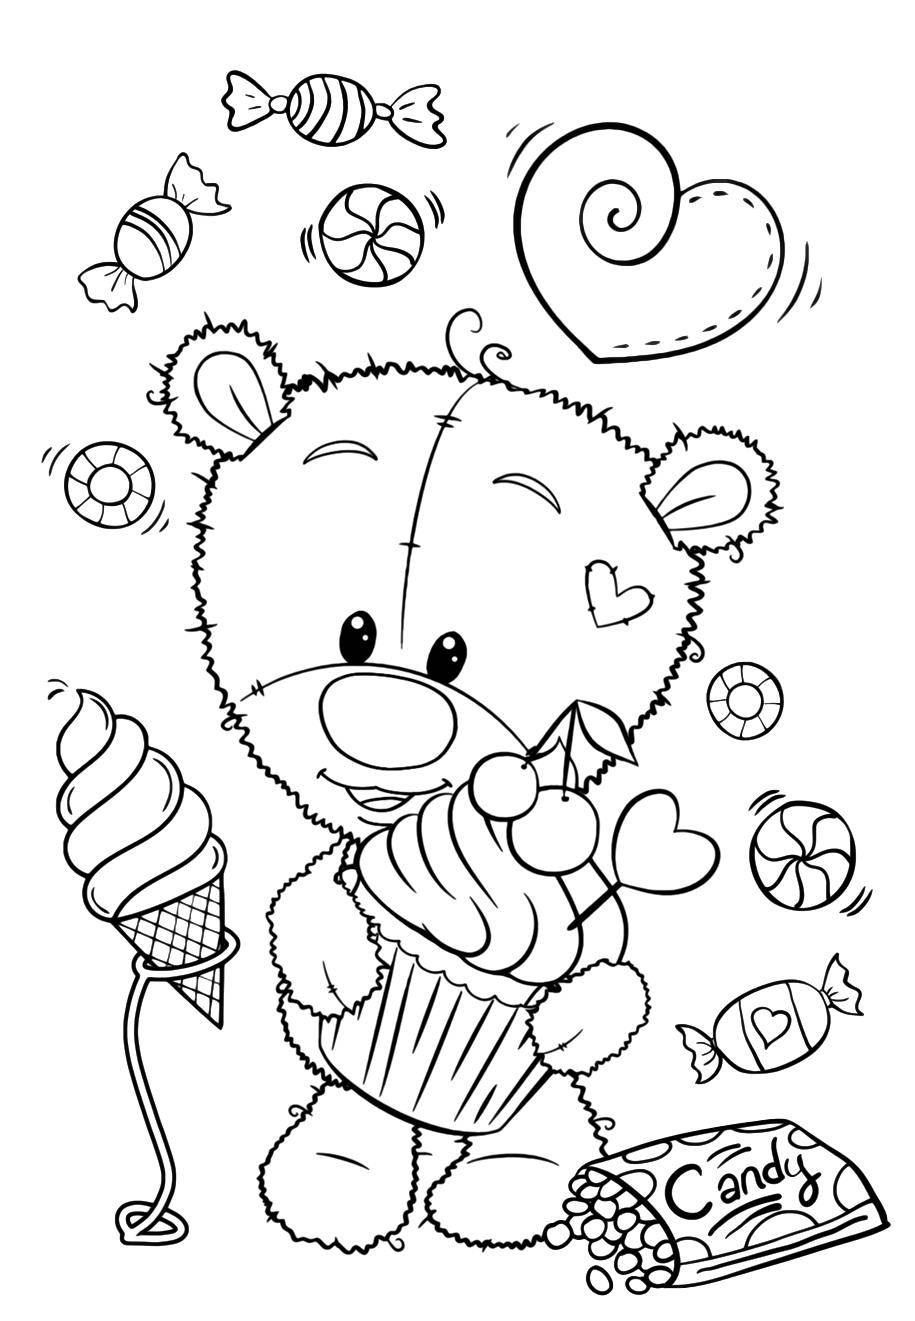 Blessed teddy bear coloring page